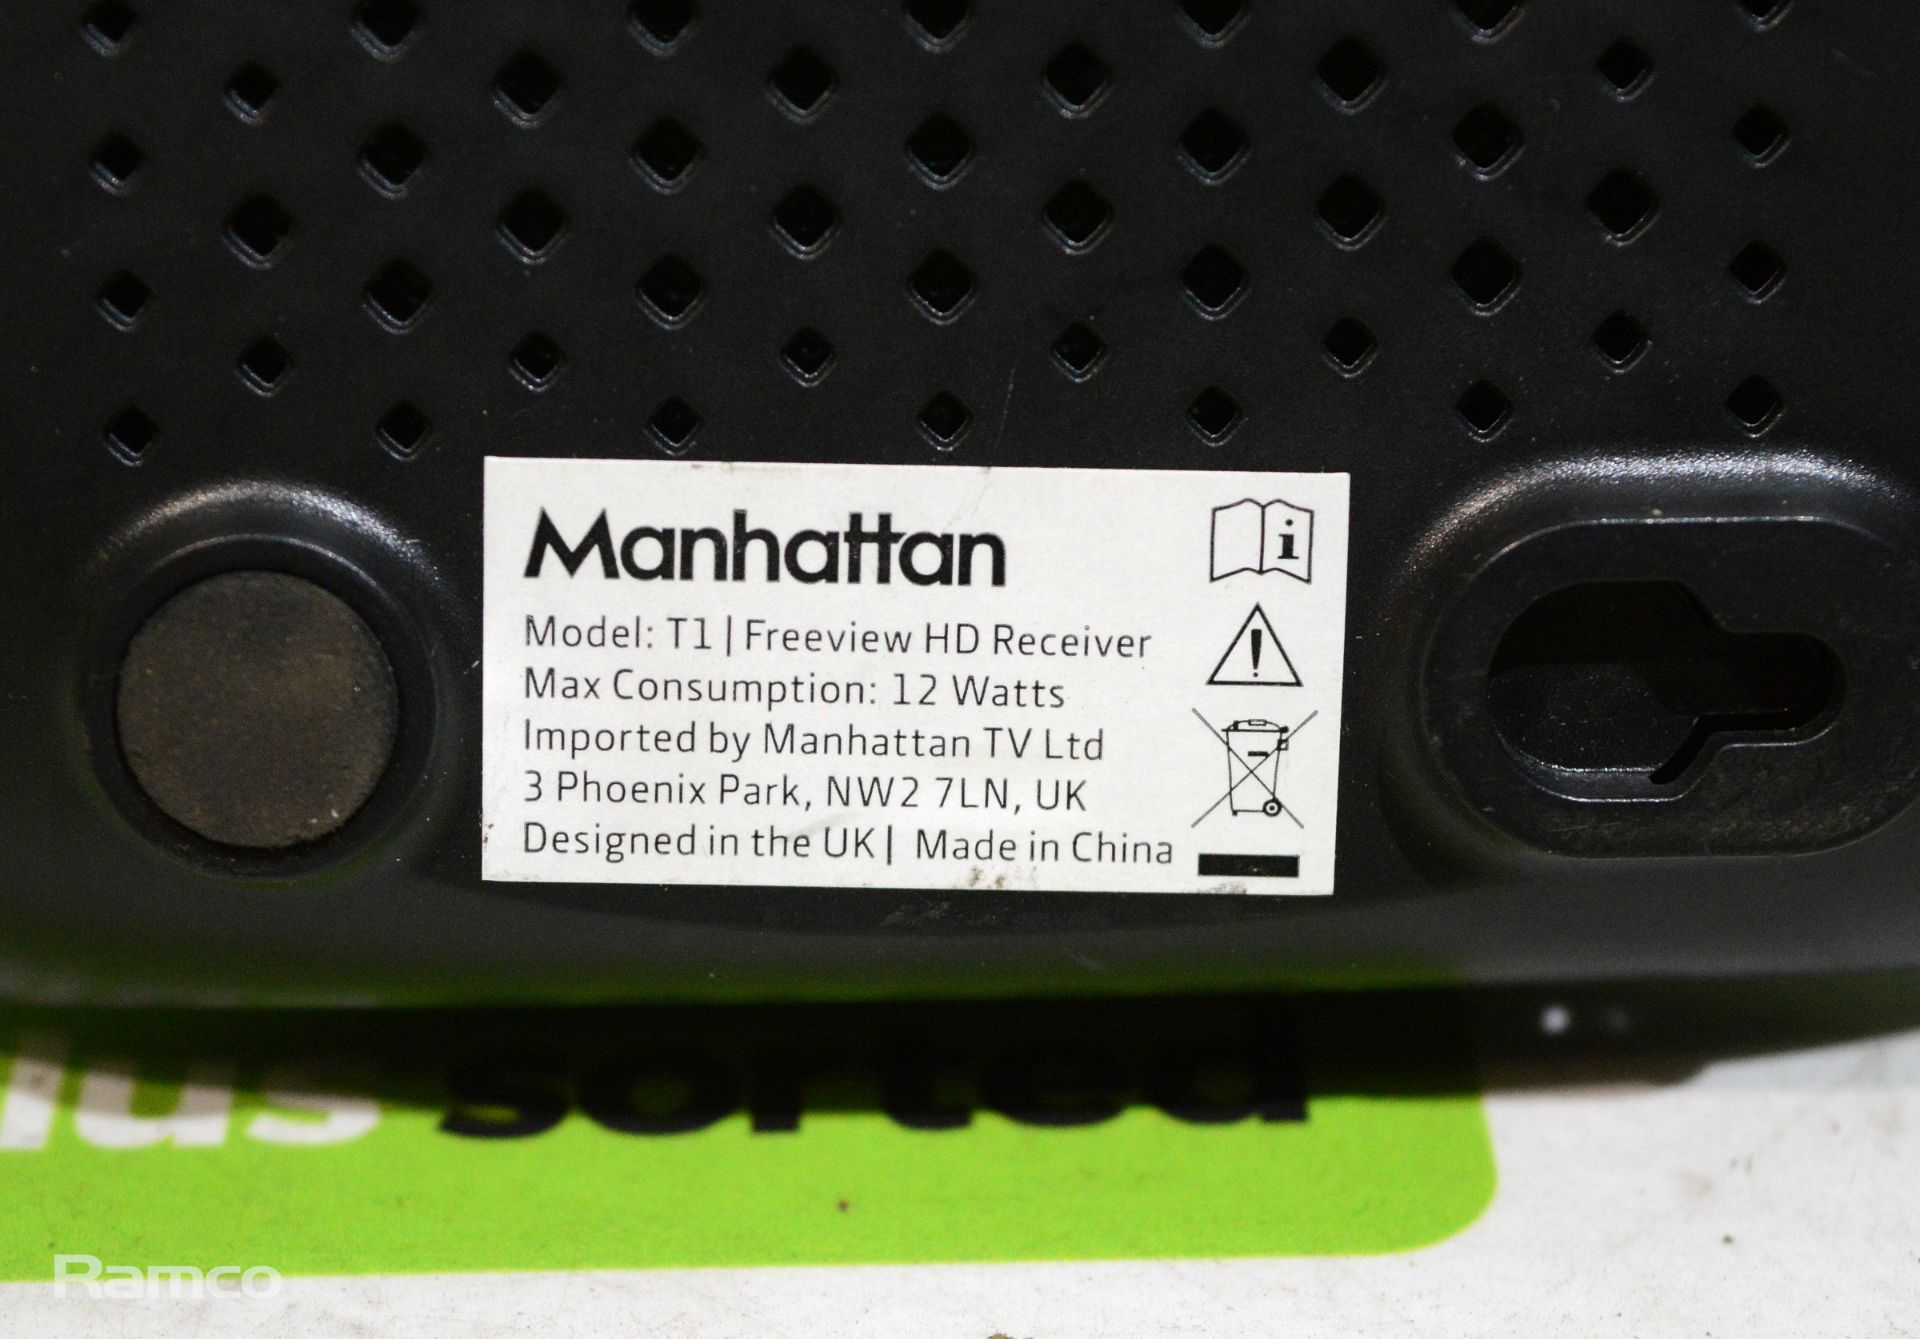 Manhattan T1 Freeview HD receiver - Image 3 of 3